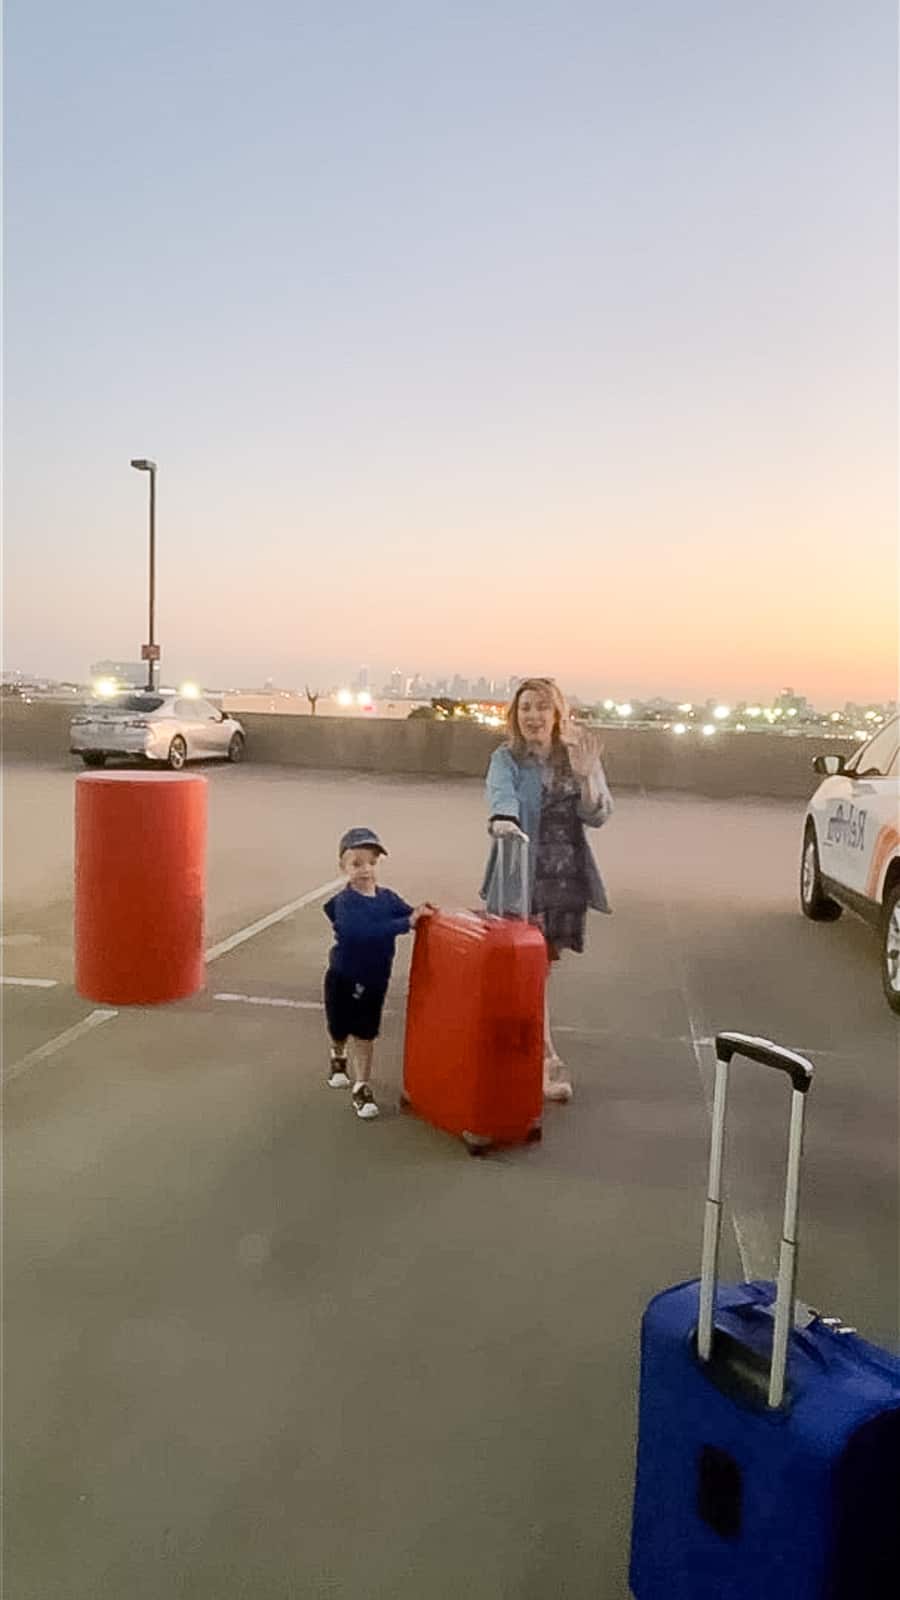 Traveling to Disney World with luggage at the airport